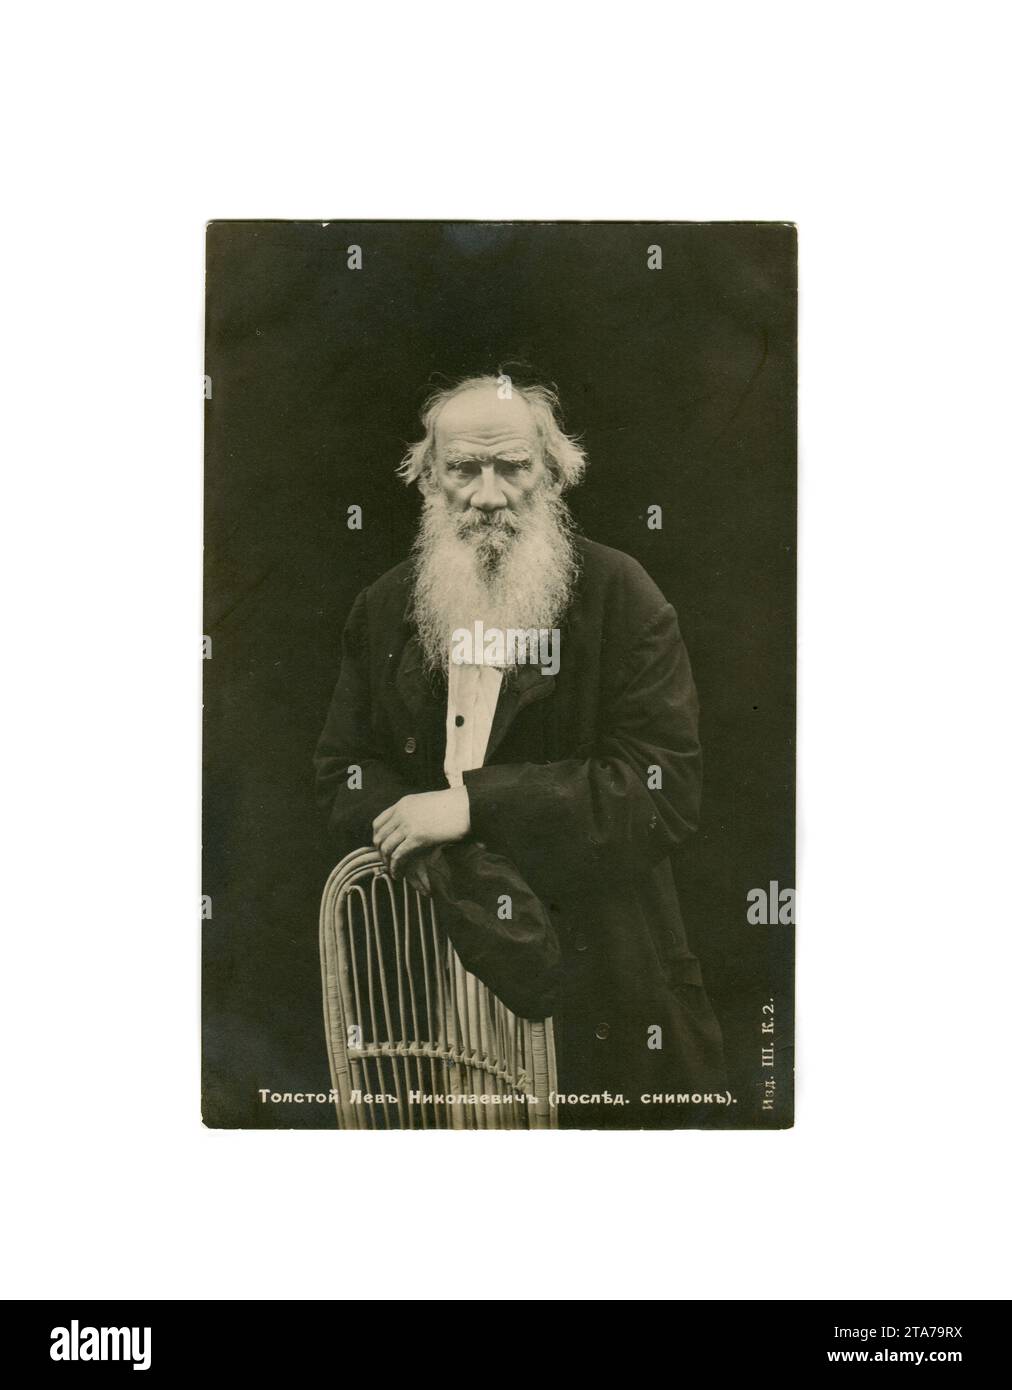 Photo of Lev Nikolayevich Tolstoy (Russian: Лев Николаевич Толстой; 9 September [O.S. 28 August] 1828 – 20 November [O.S. 7 November] 1910), usually referred to in English as Leo Tolstoy, was a Russian writer, by Karl Bulla. Old Vintage postcard of the Russian Empire, 1900s. Stock Photo